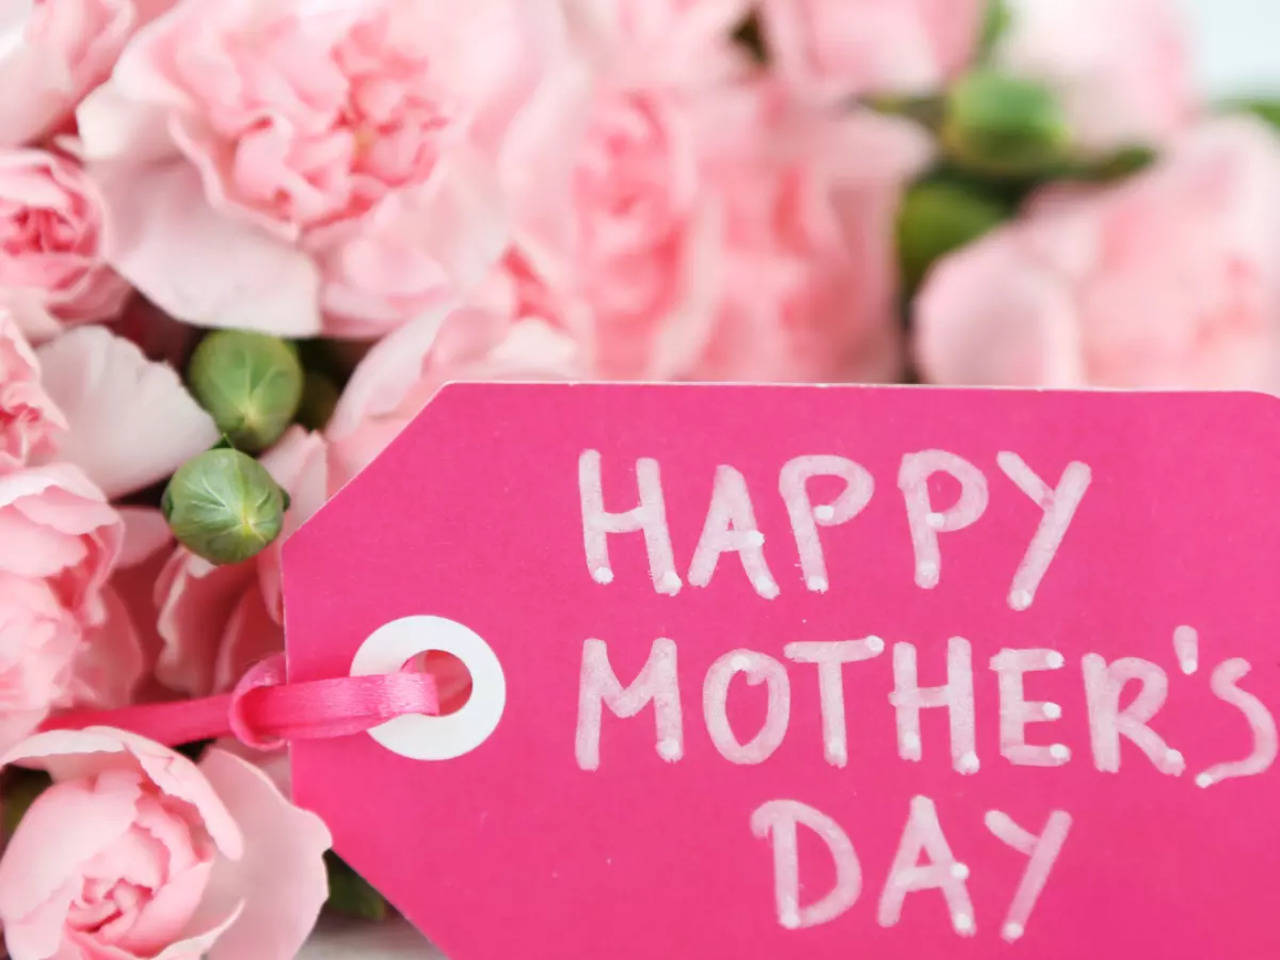 Mother's Day Poems, Quotes, Wishes & Messages: Beautiful Mother's ...